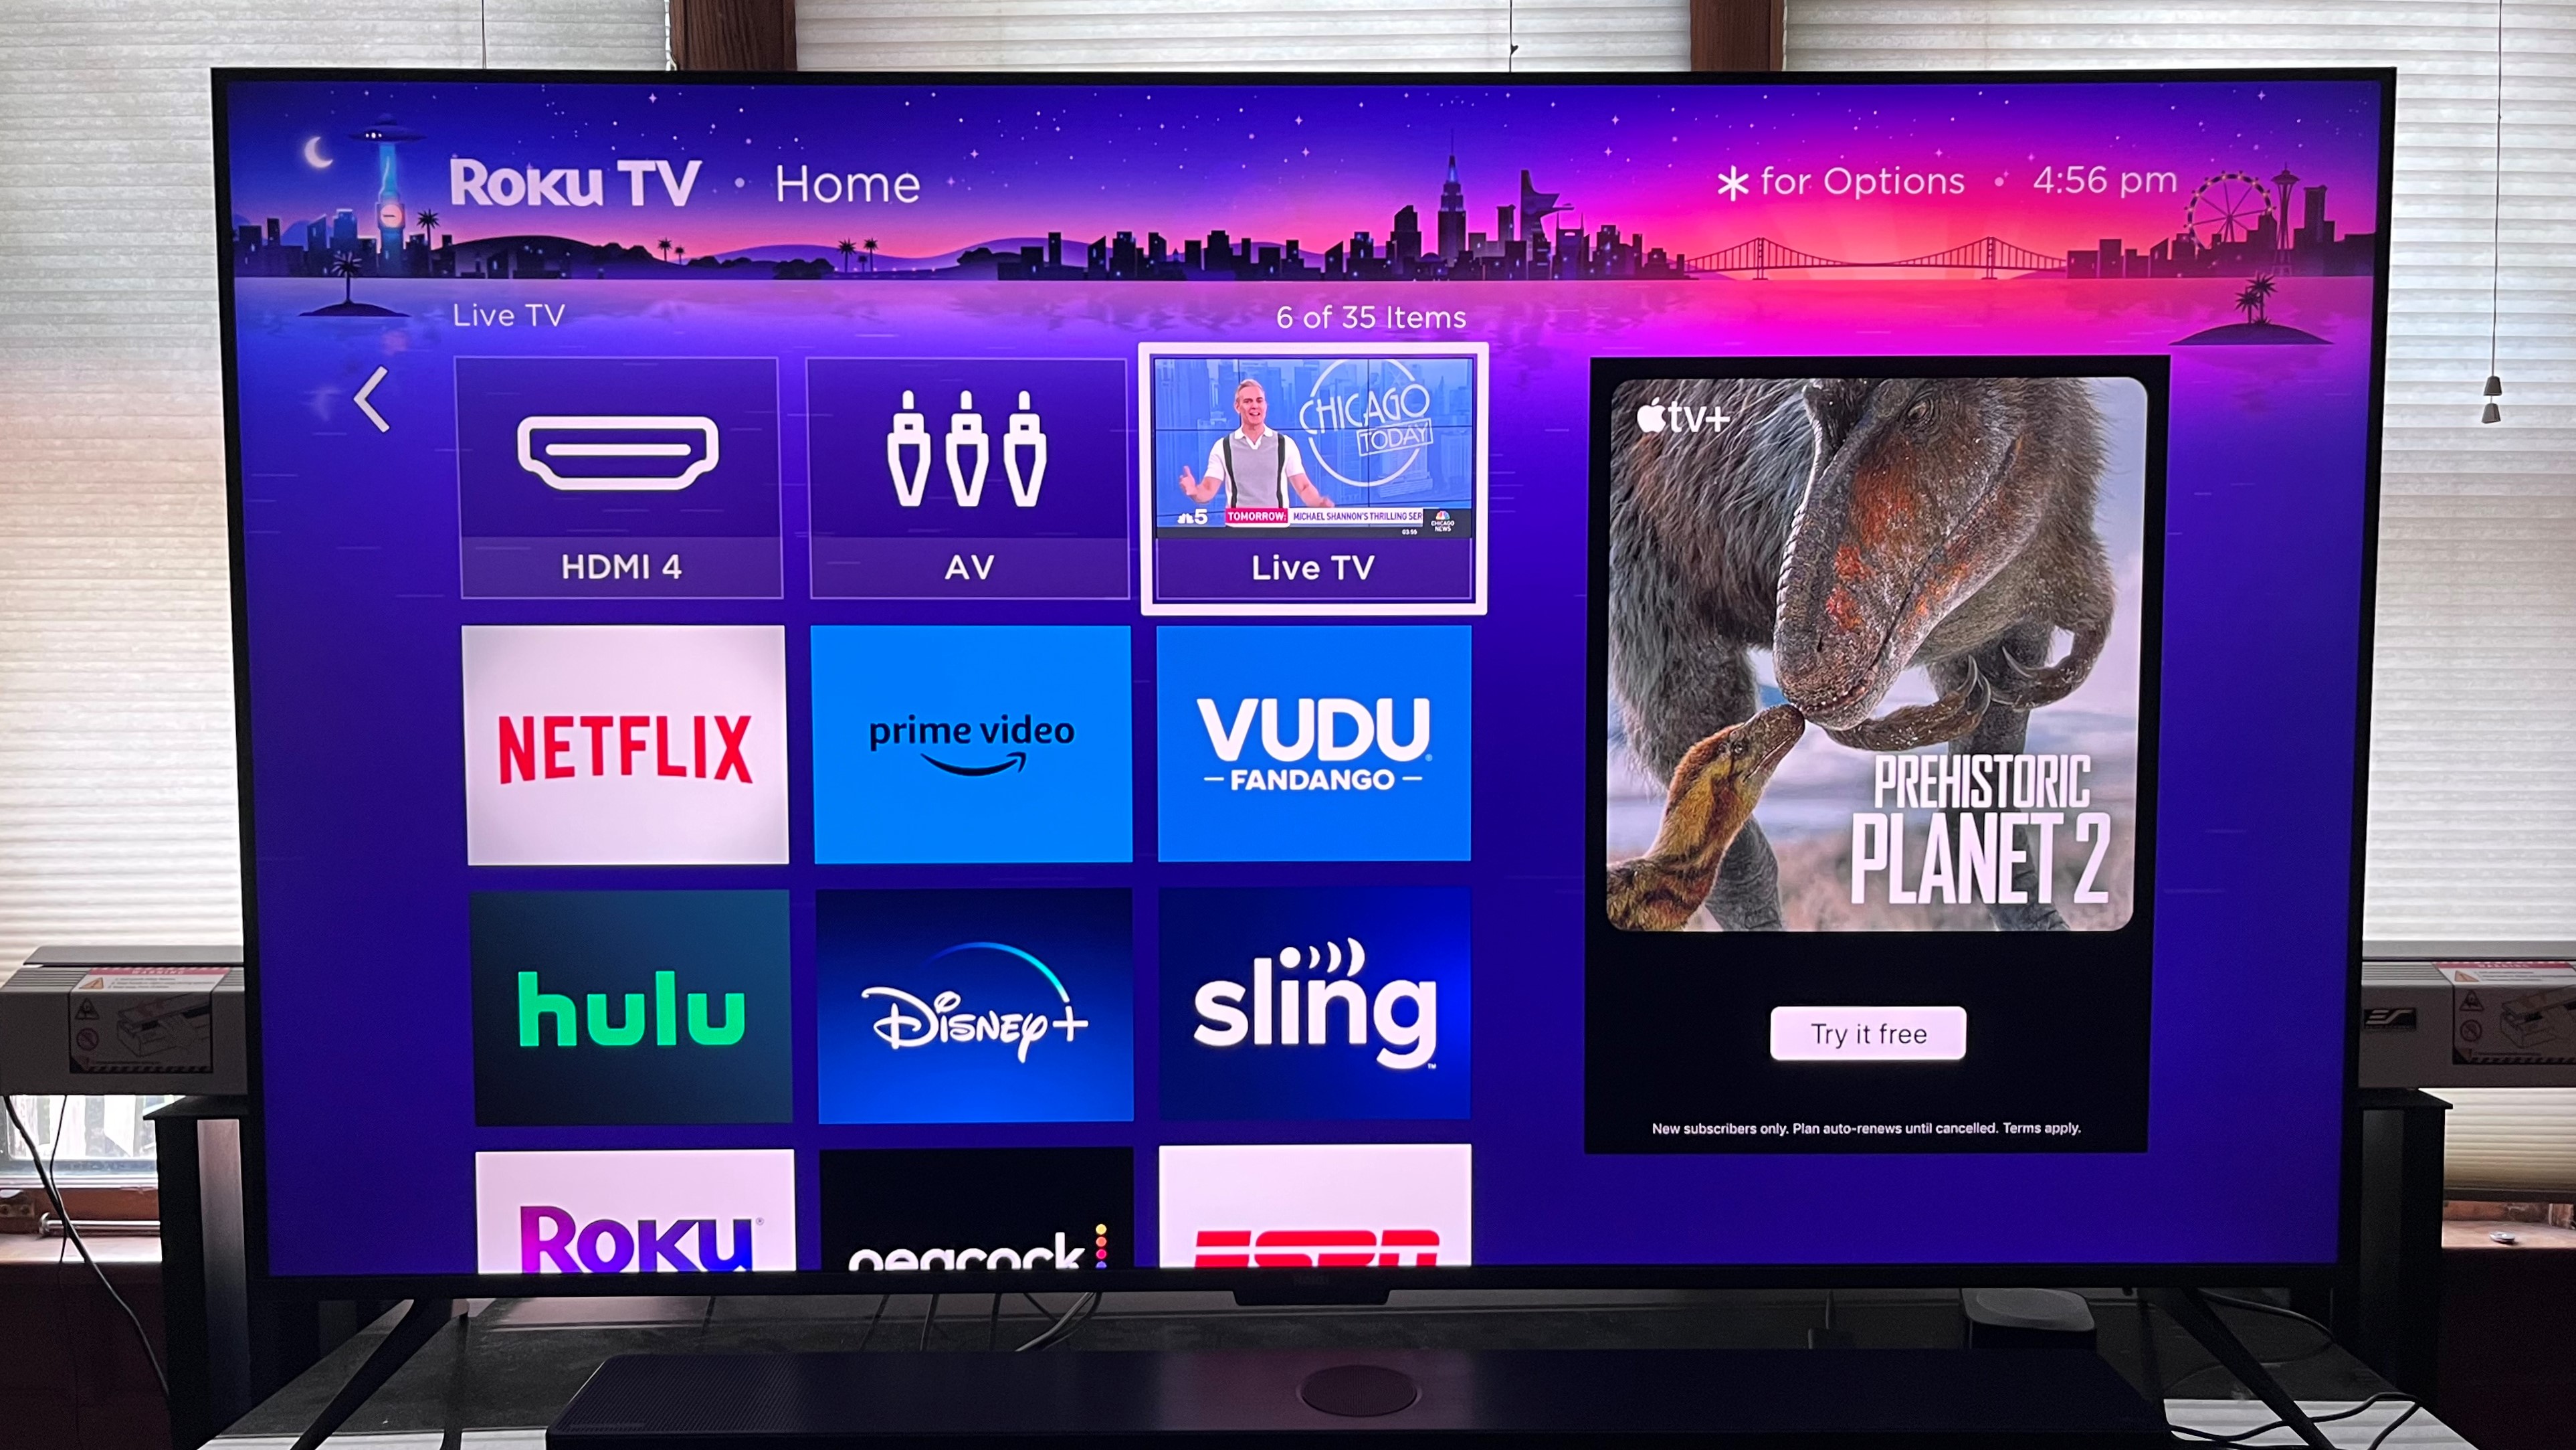 Roku TVs' free channels are great, but there are too many – here's